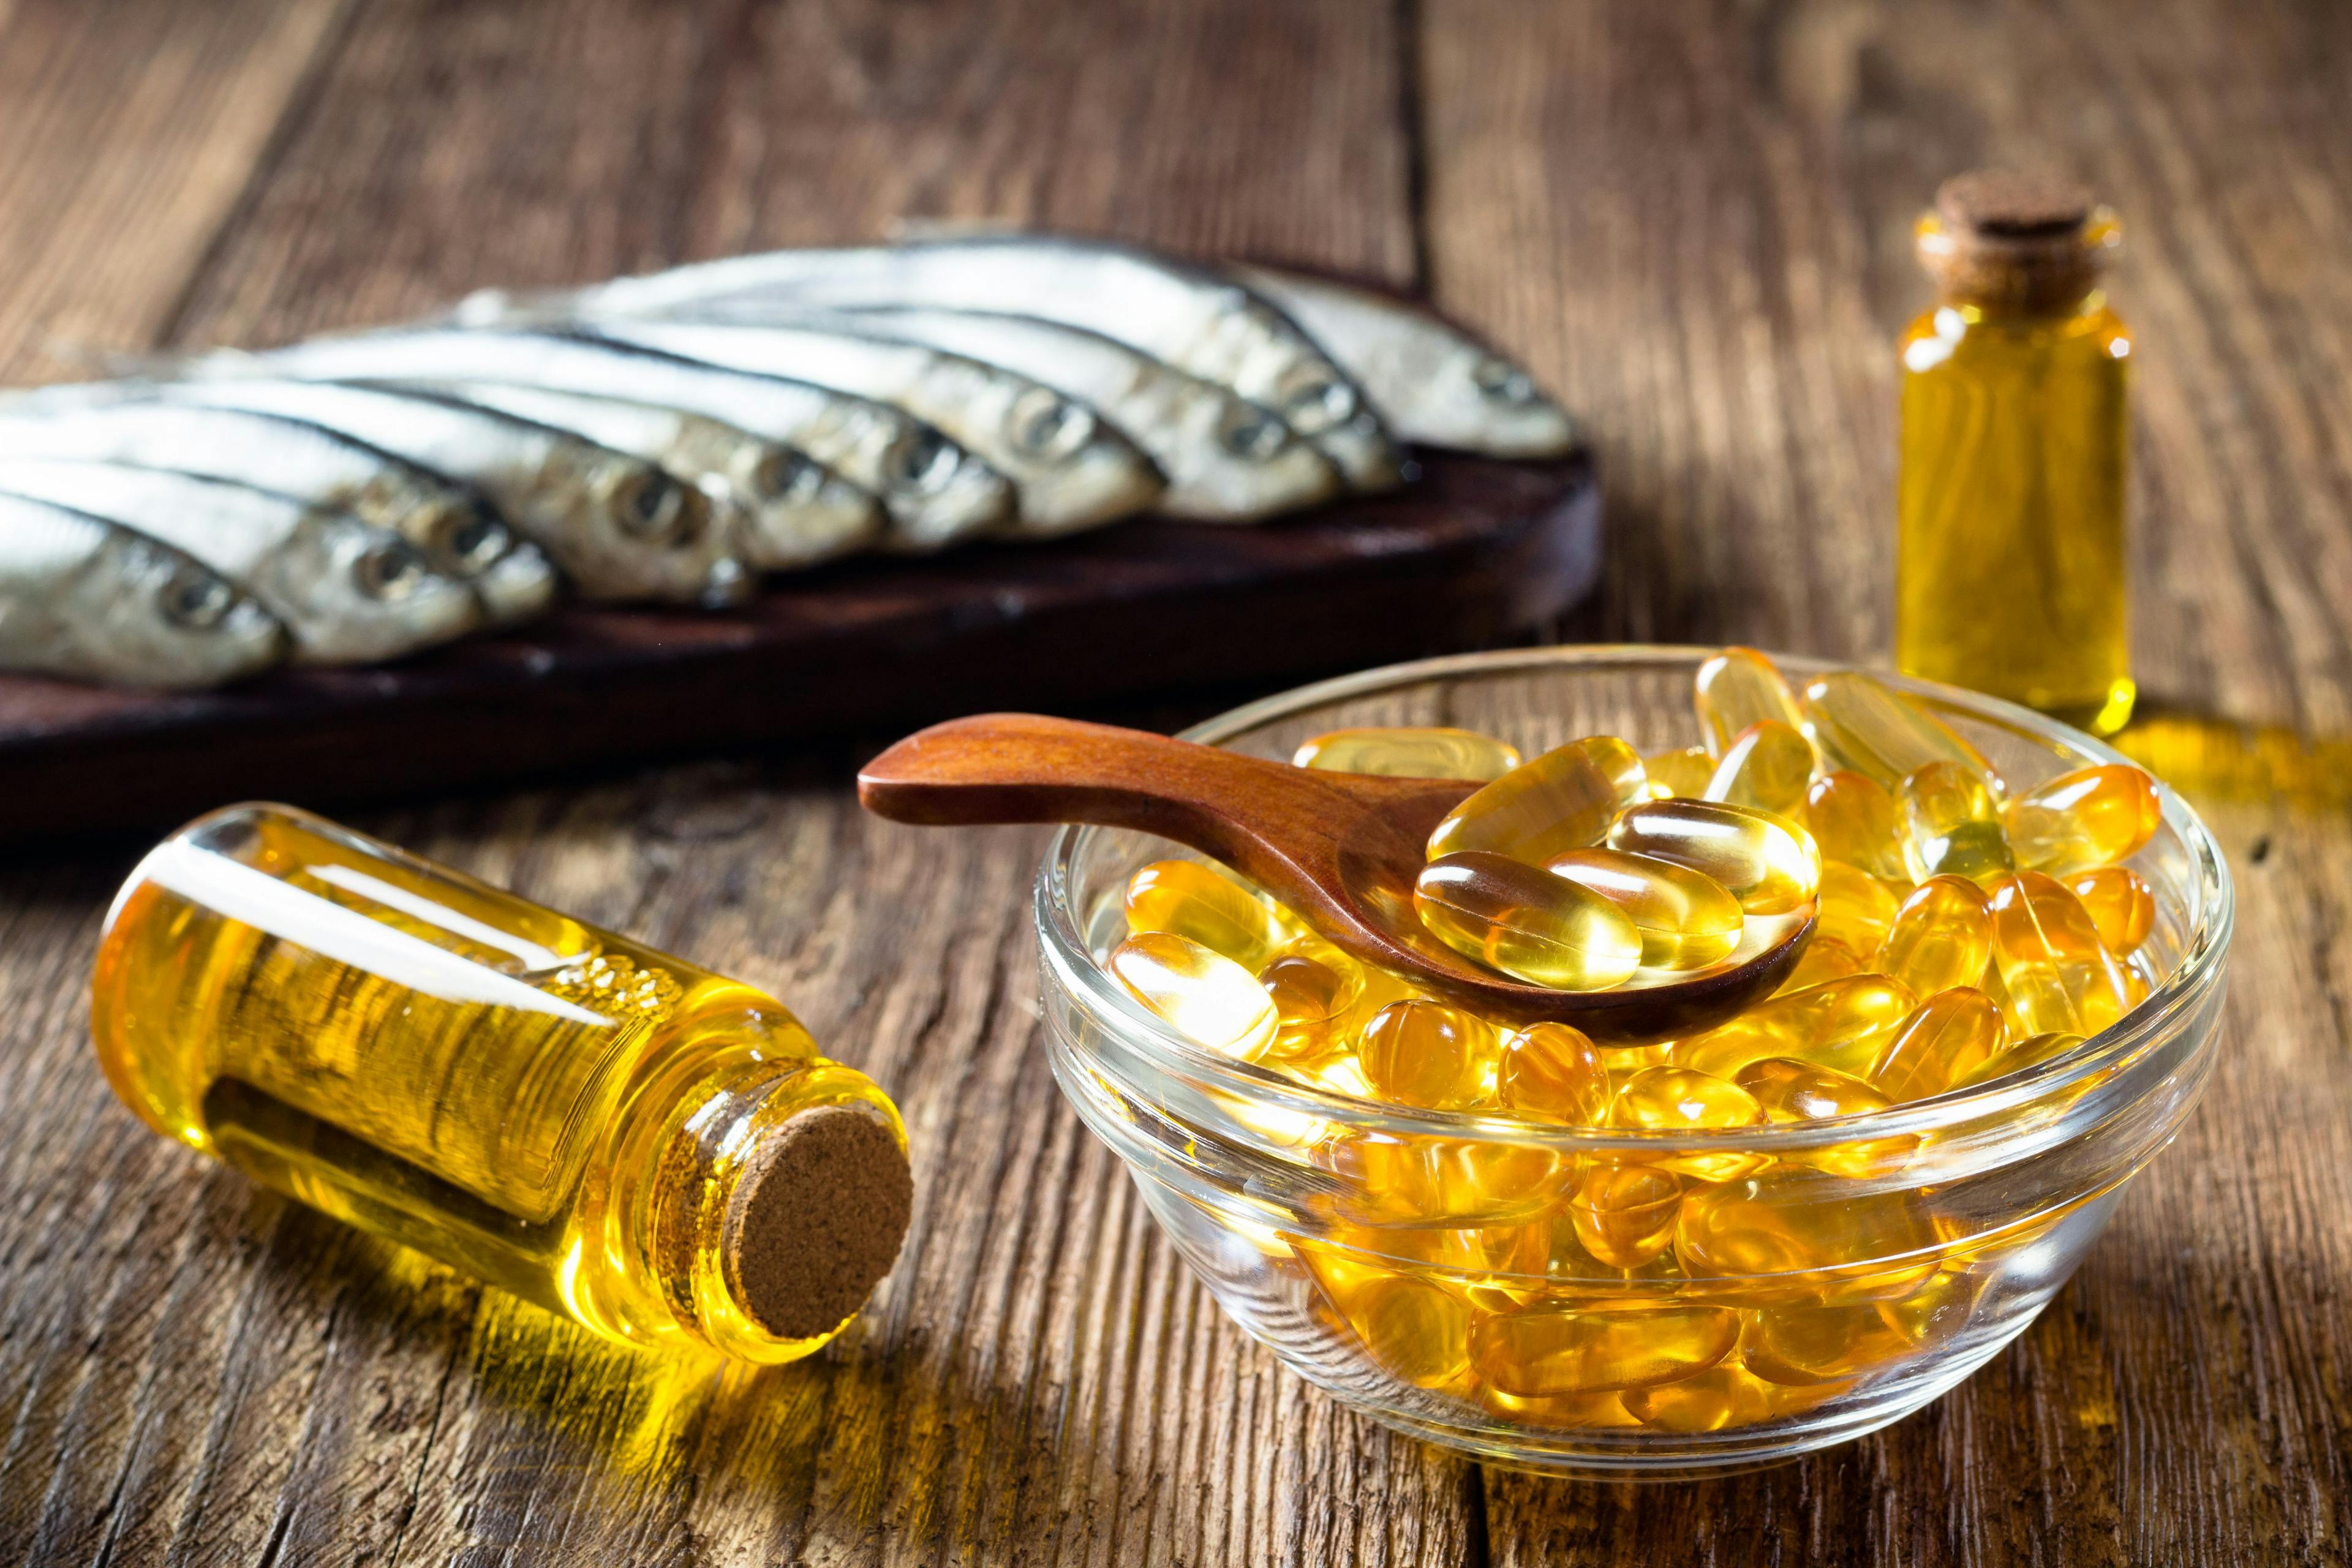 Fish Oil Supplements are Widely Promoted for Heart Health, But is it Justified?